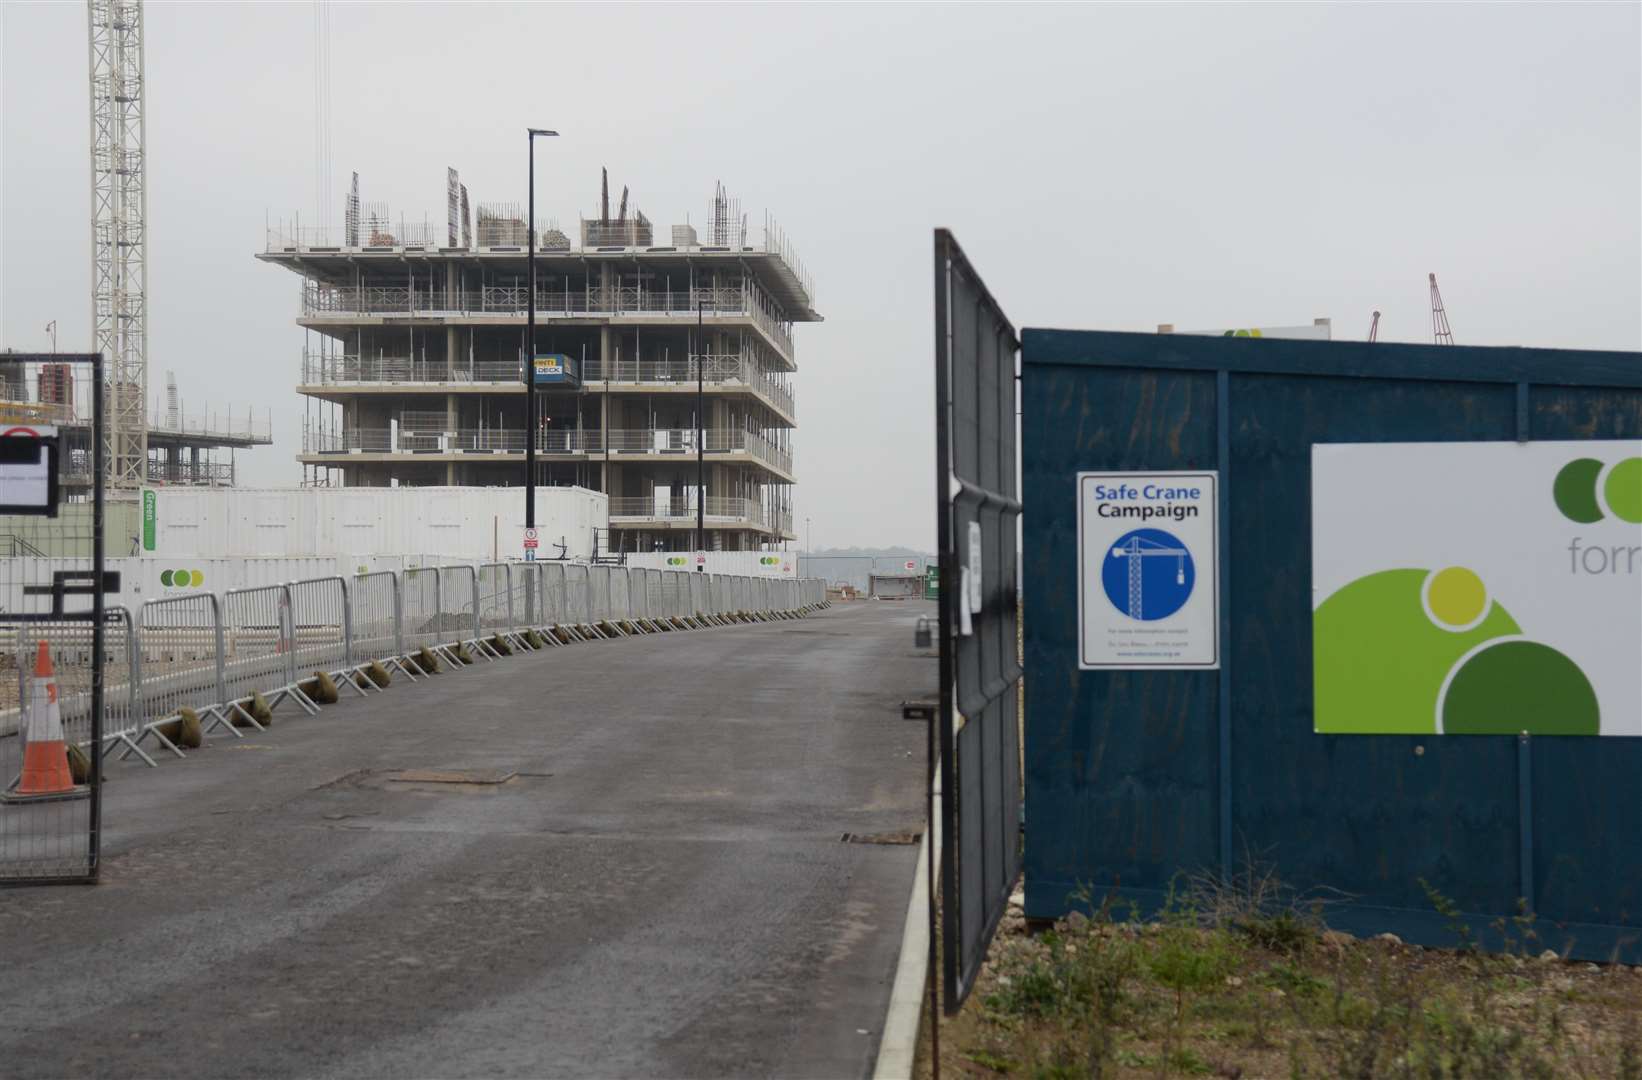 The Chatham Waters development is one of a number of works taking place across Medway, but has ground to a temporary halt